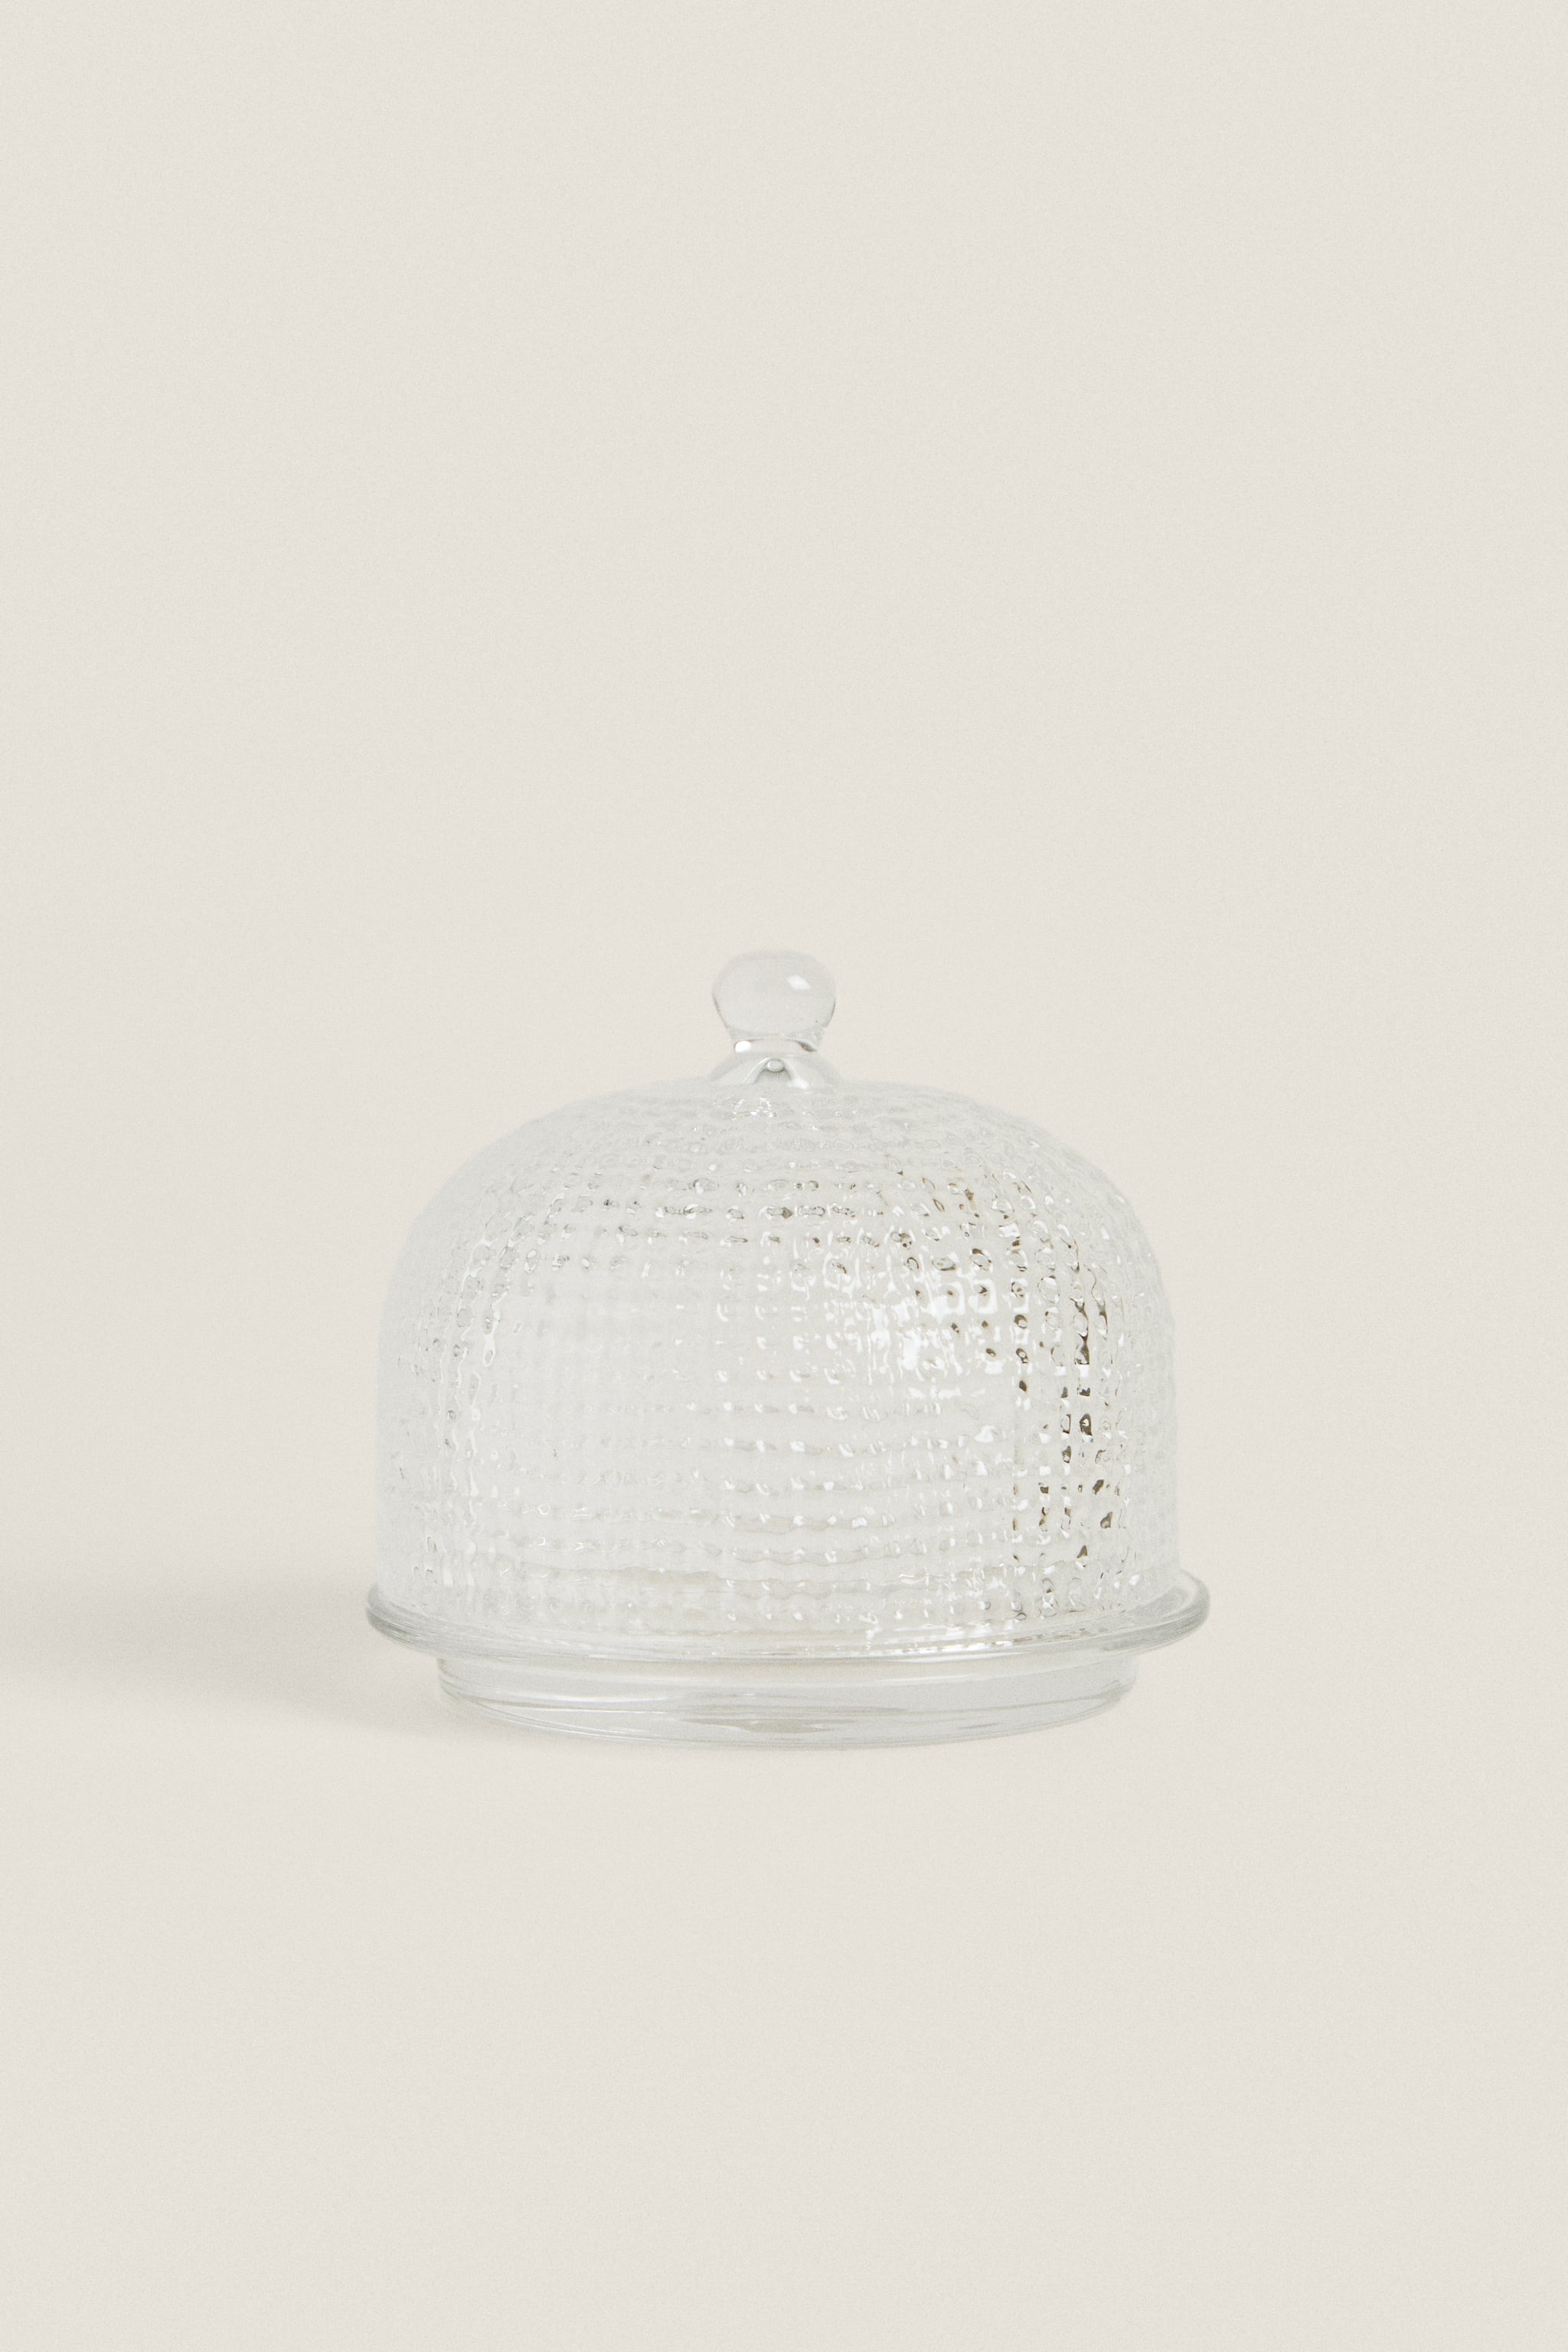 GLASS BUTTER DISH WITH RAISED DETAIL